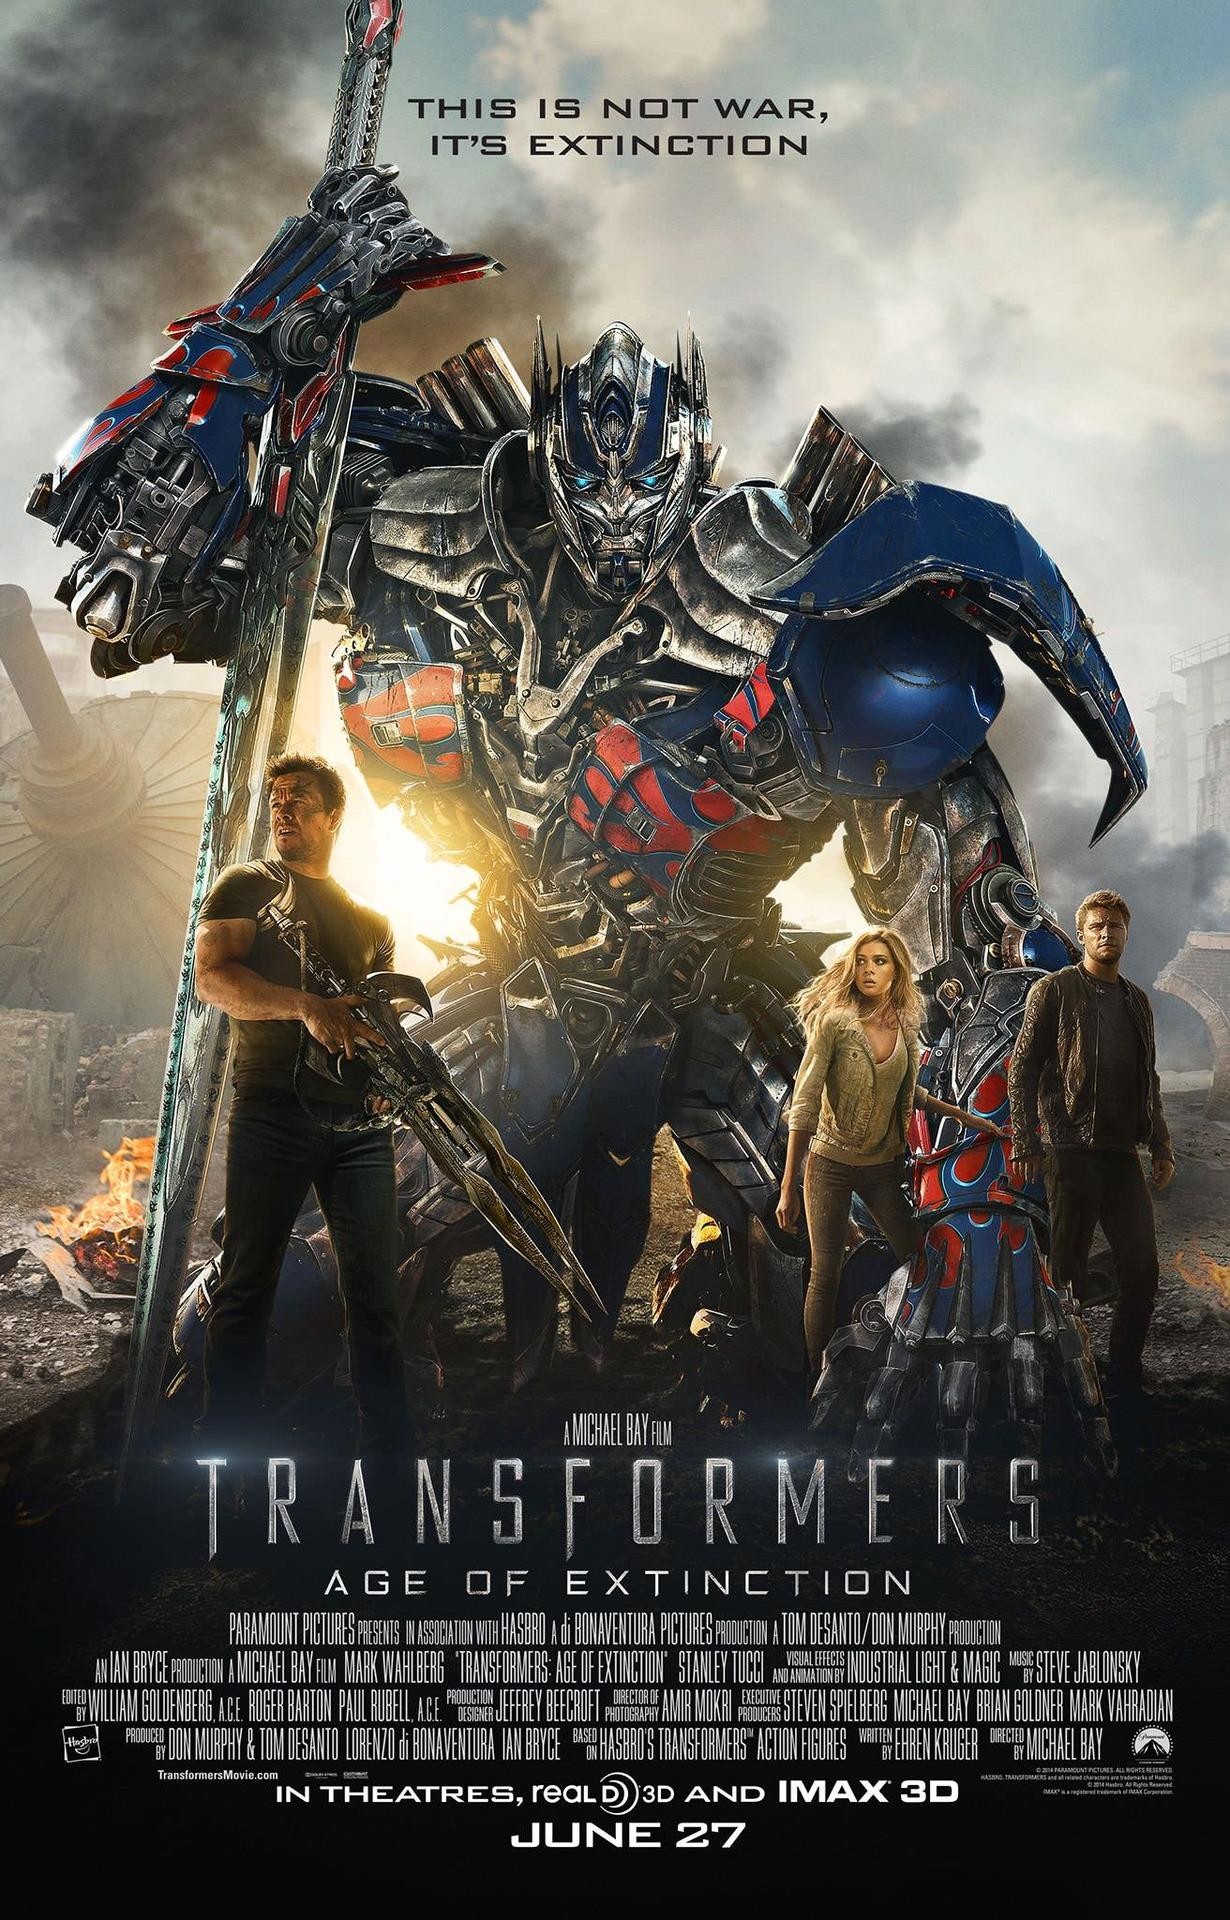 Optimus Prime Fails to Let Awful Humans Die in ‘Transformers: Age of Extinction’